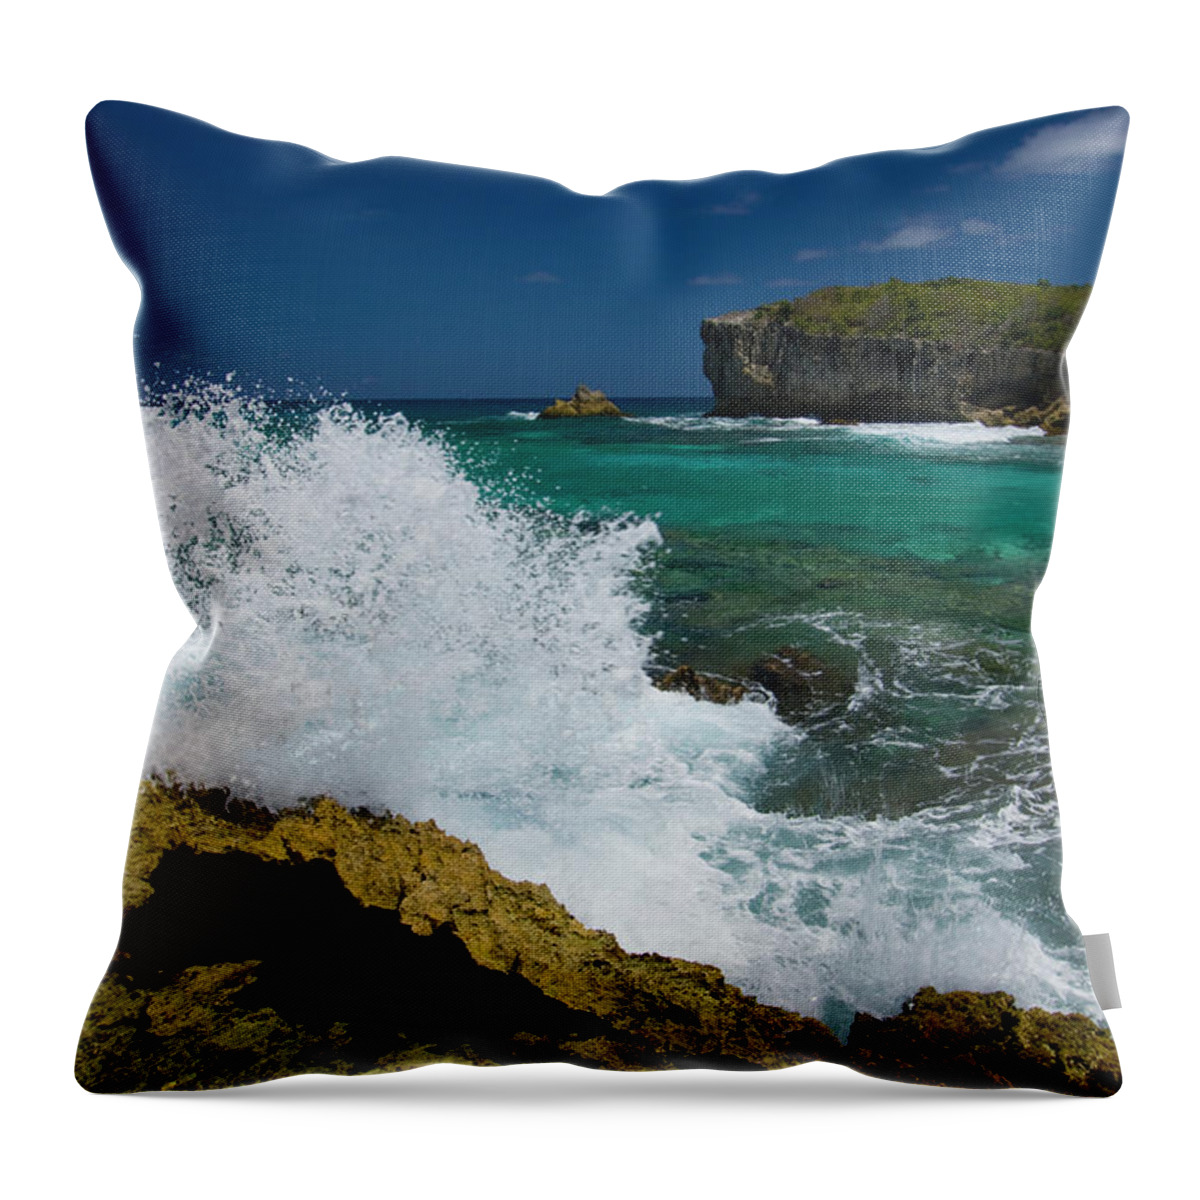 Outdoors Throw Pillow featuring the photograph Hells Gate Seaside Guadeloupe by Jean-pierre Pieuchot